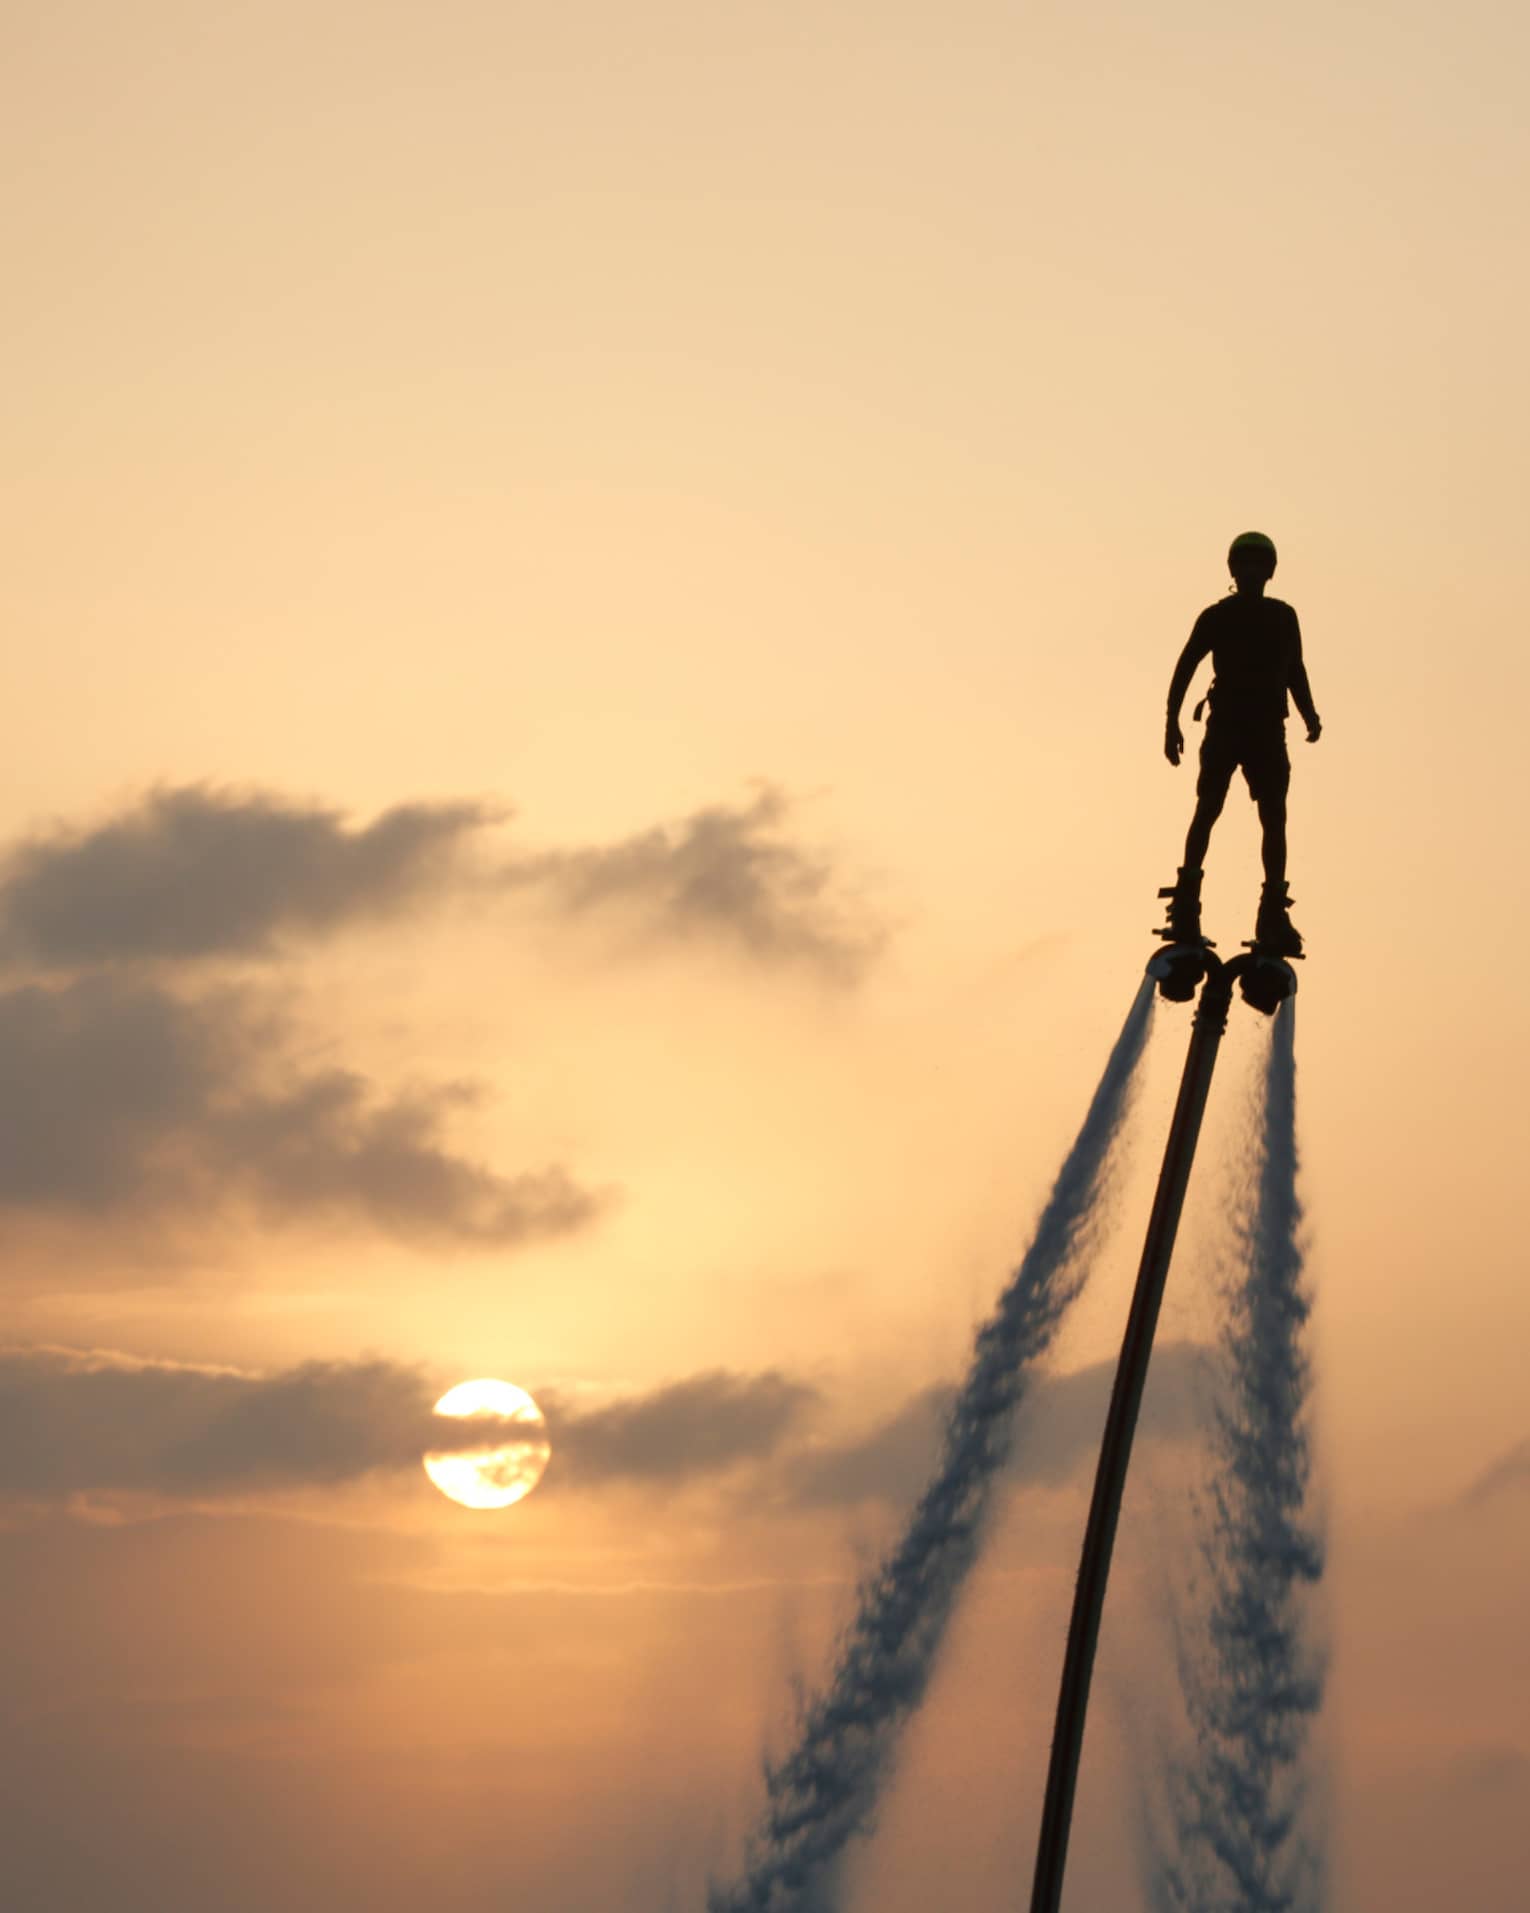 Silhouette of person soaring high above ocean on jet pack, water trails below, against sunset